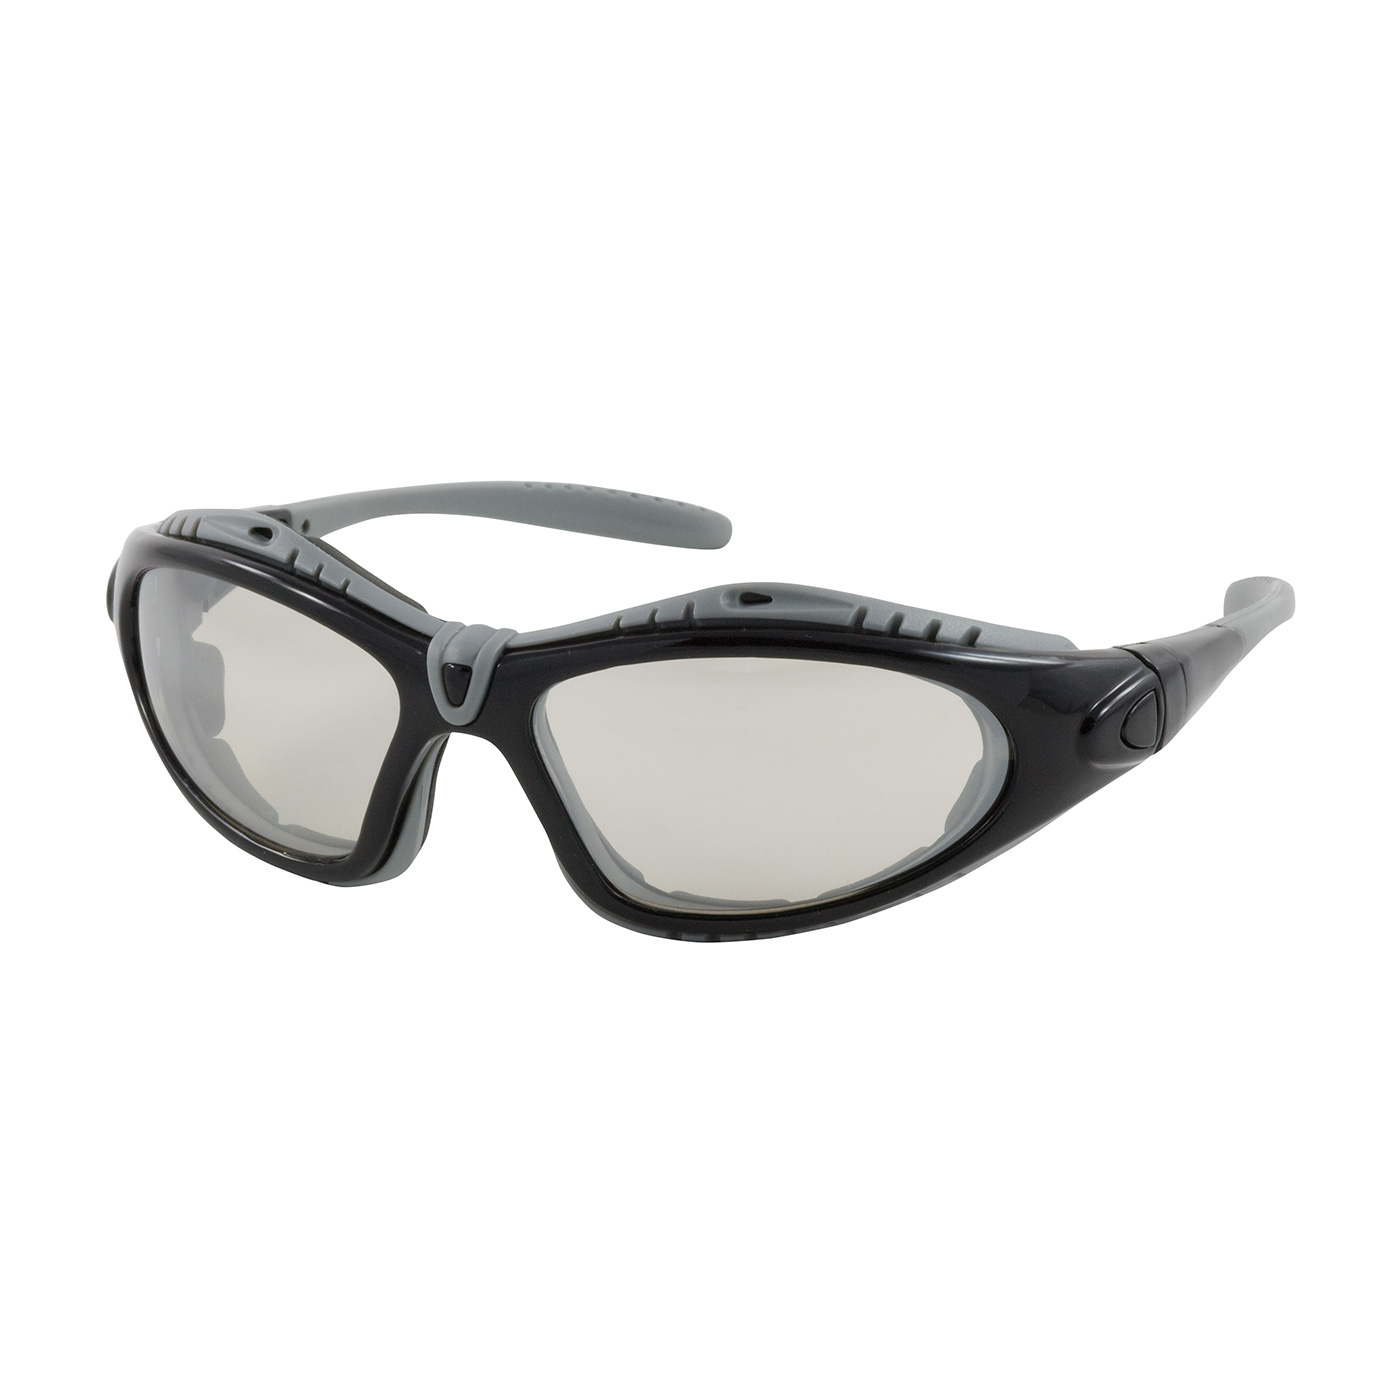 Pip Fuselage Full Frame Anti-Scratch Safety Glasses from Columbia Safety